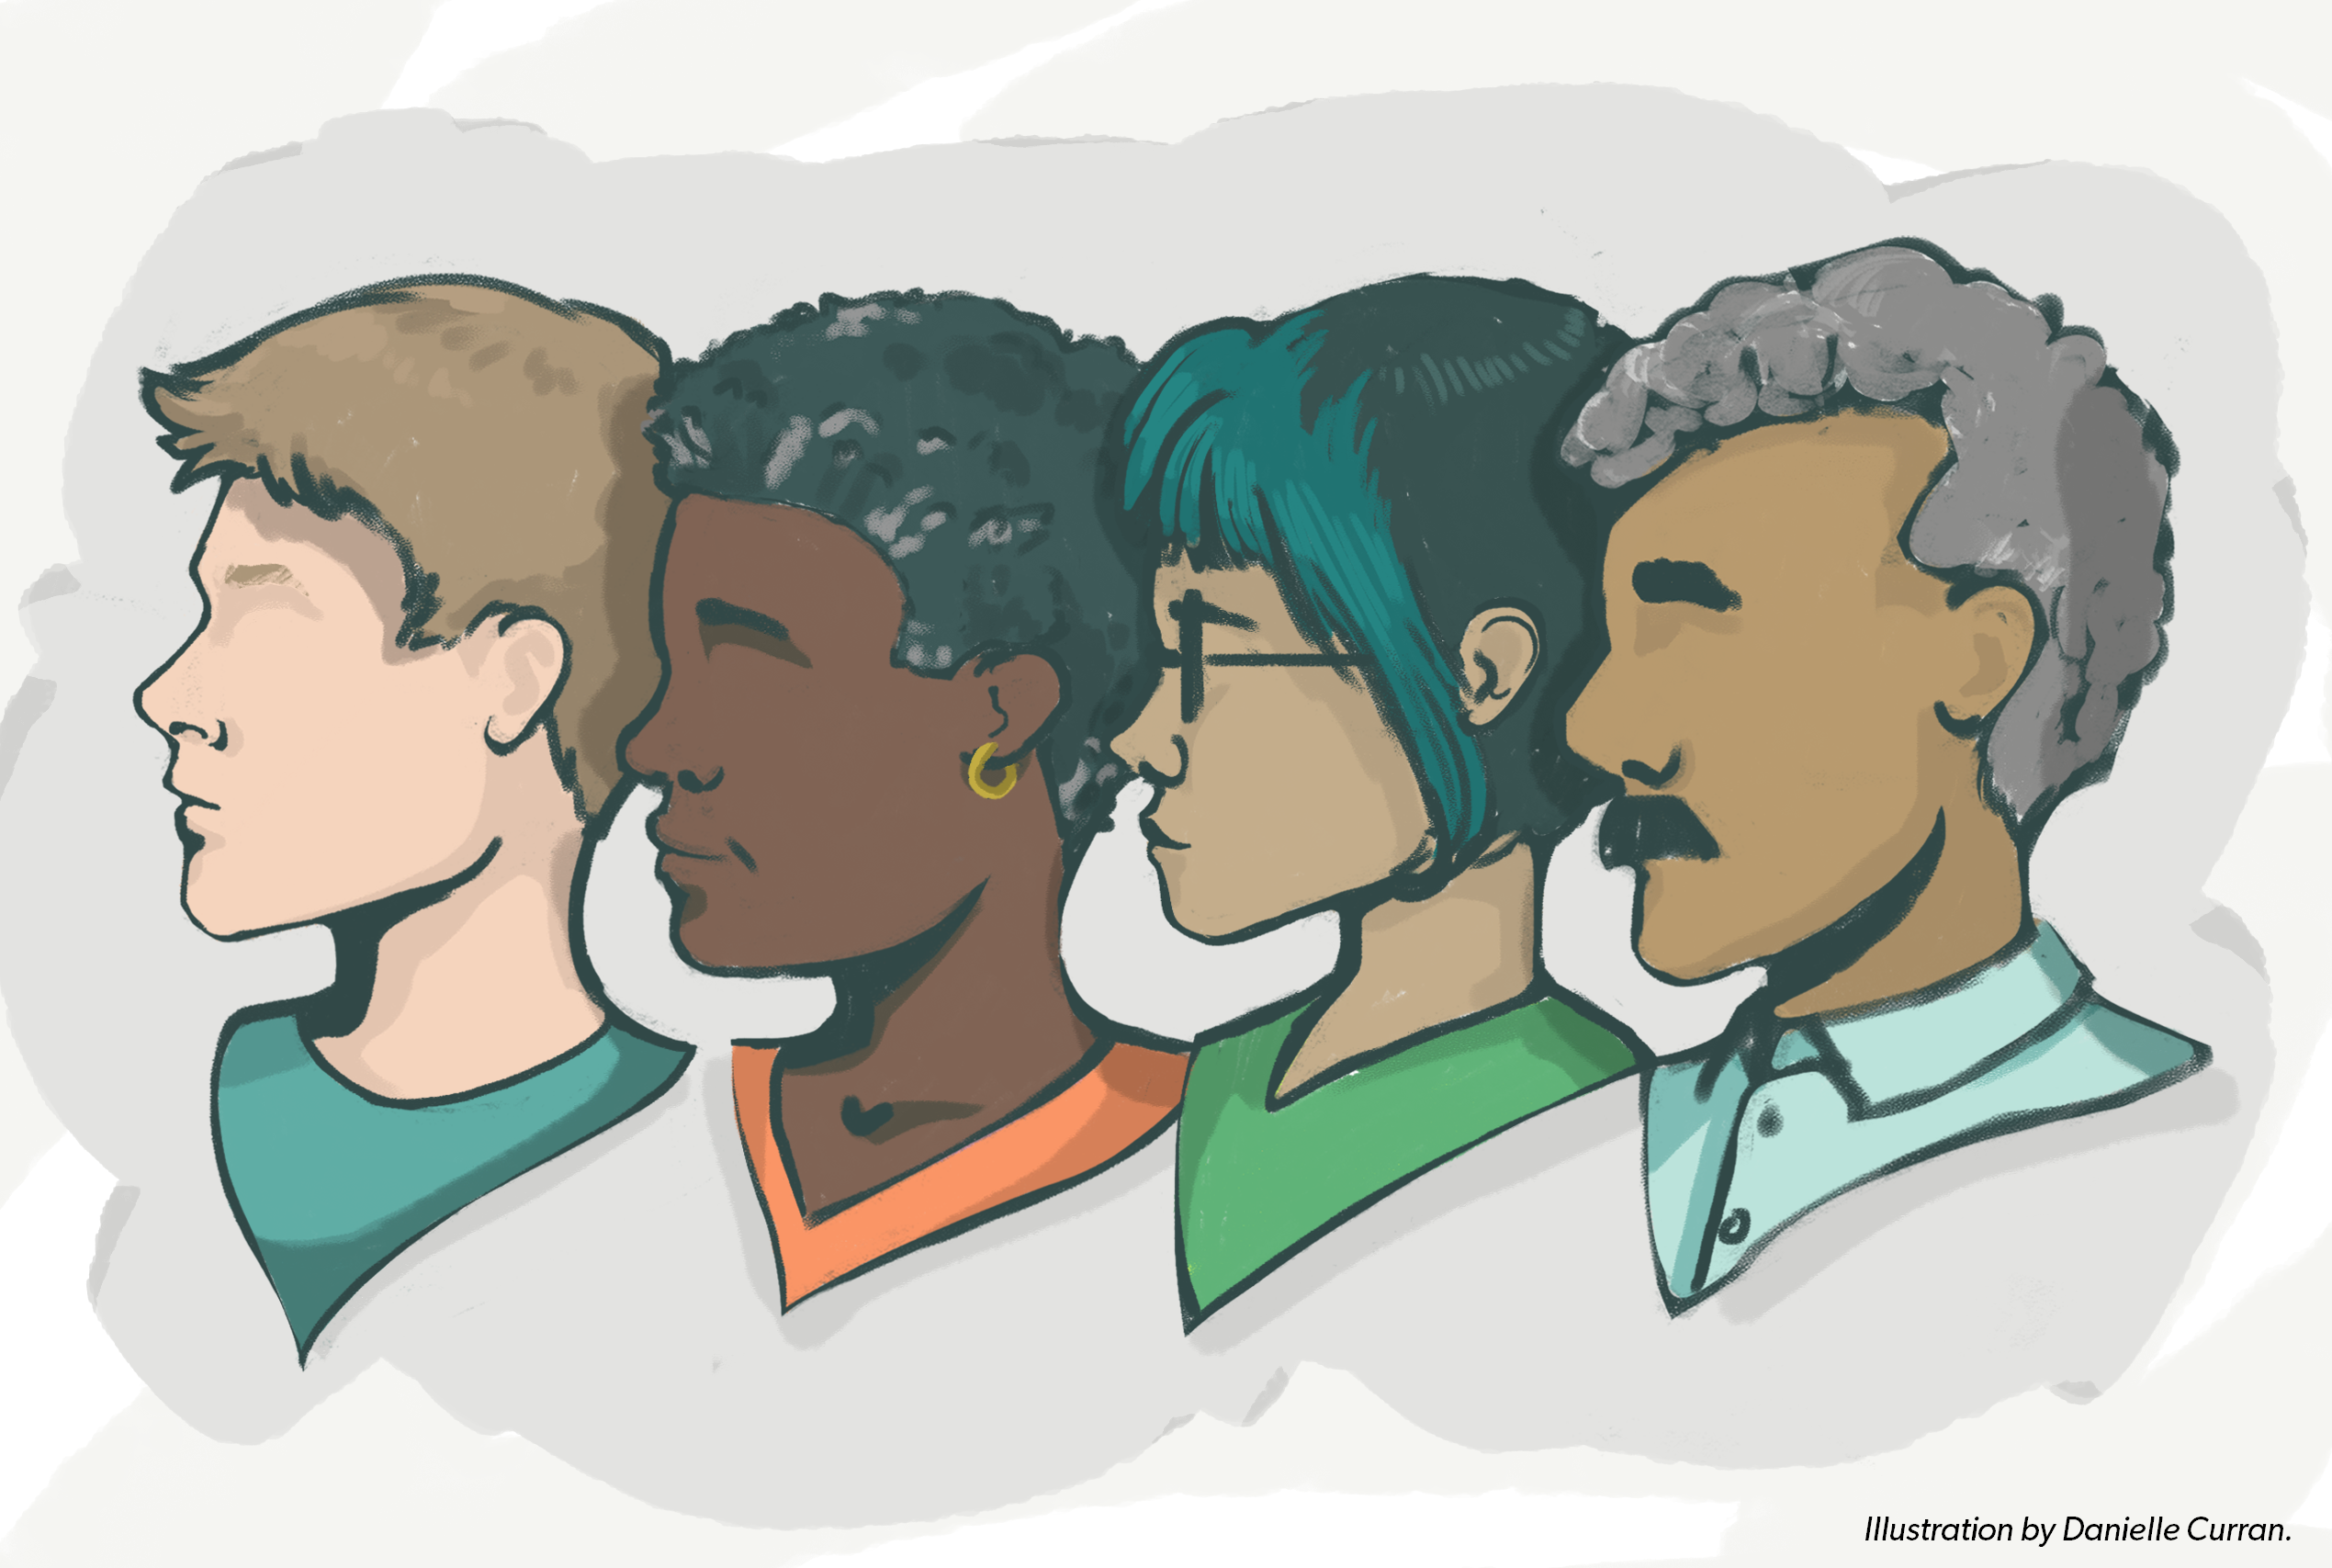 An illustration of the side profiles of four people. From left to right: a young white man with blond hair, an older Black woman with short, curly Black hair, a young woman with tan skin and black hair with a blue streak, an older man with darker tan skin with curly grey hair and a mustache.